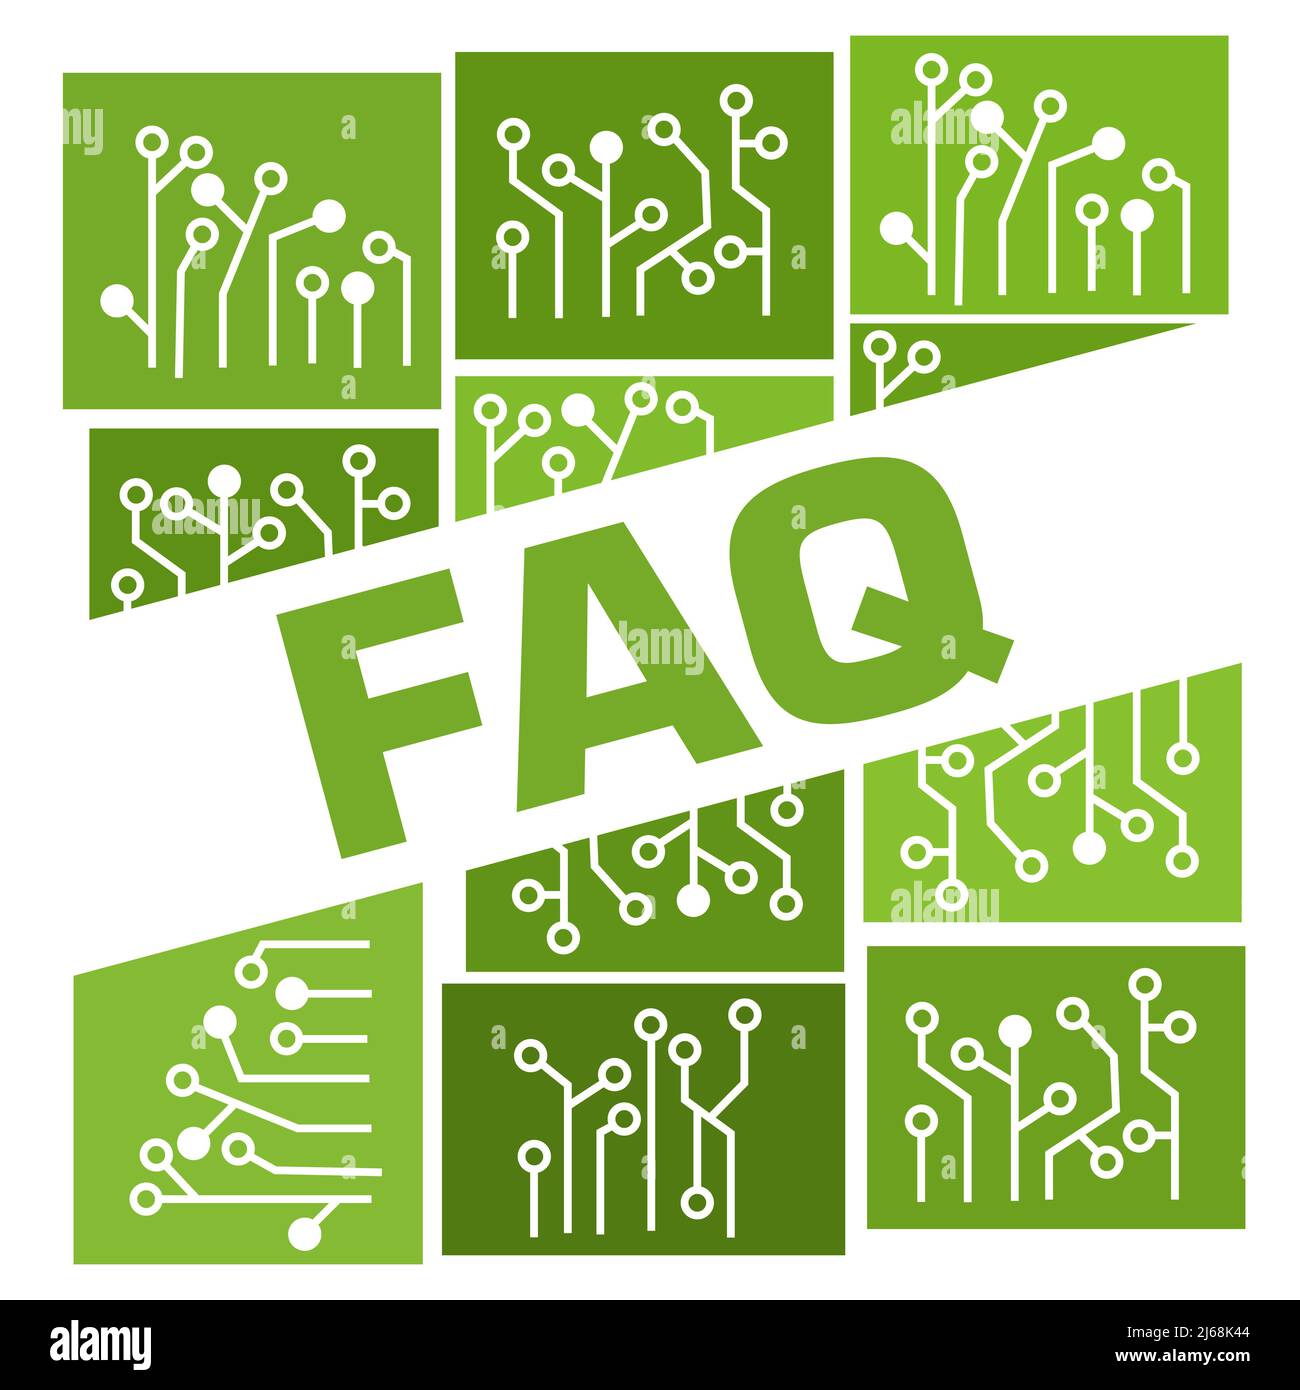 FAQ - Frequently Asked Questions Green Boxes Circuit Grid Badge Style Stock Photo